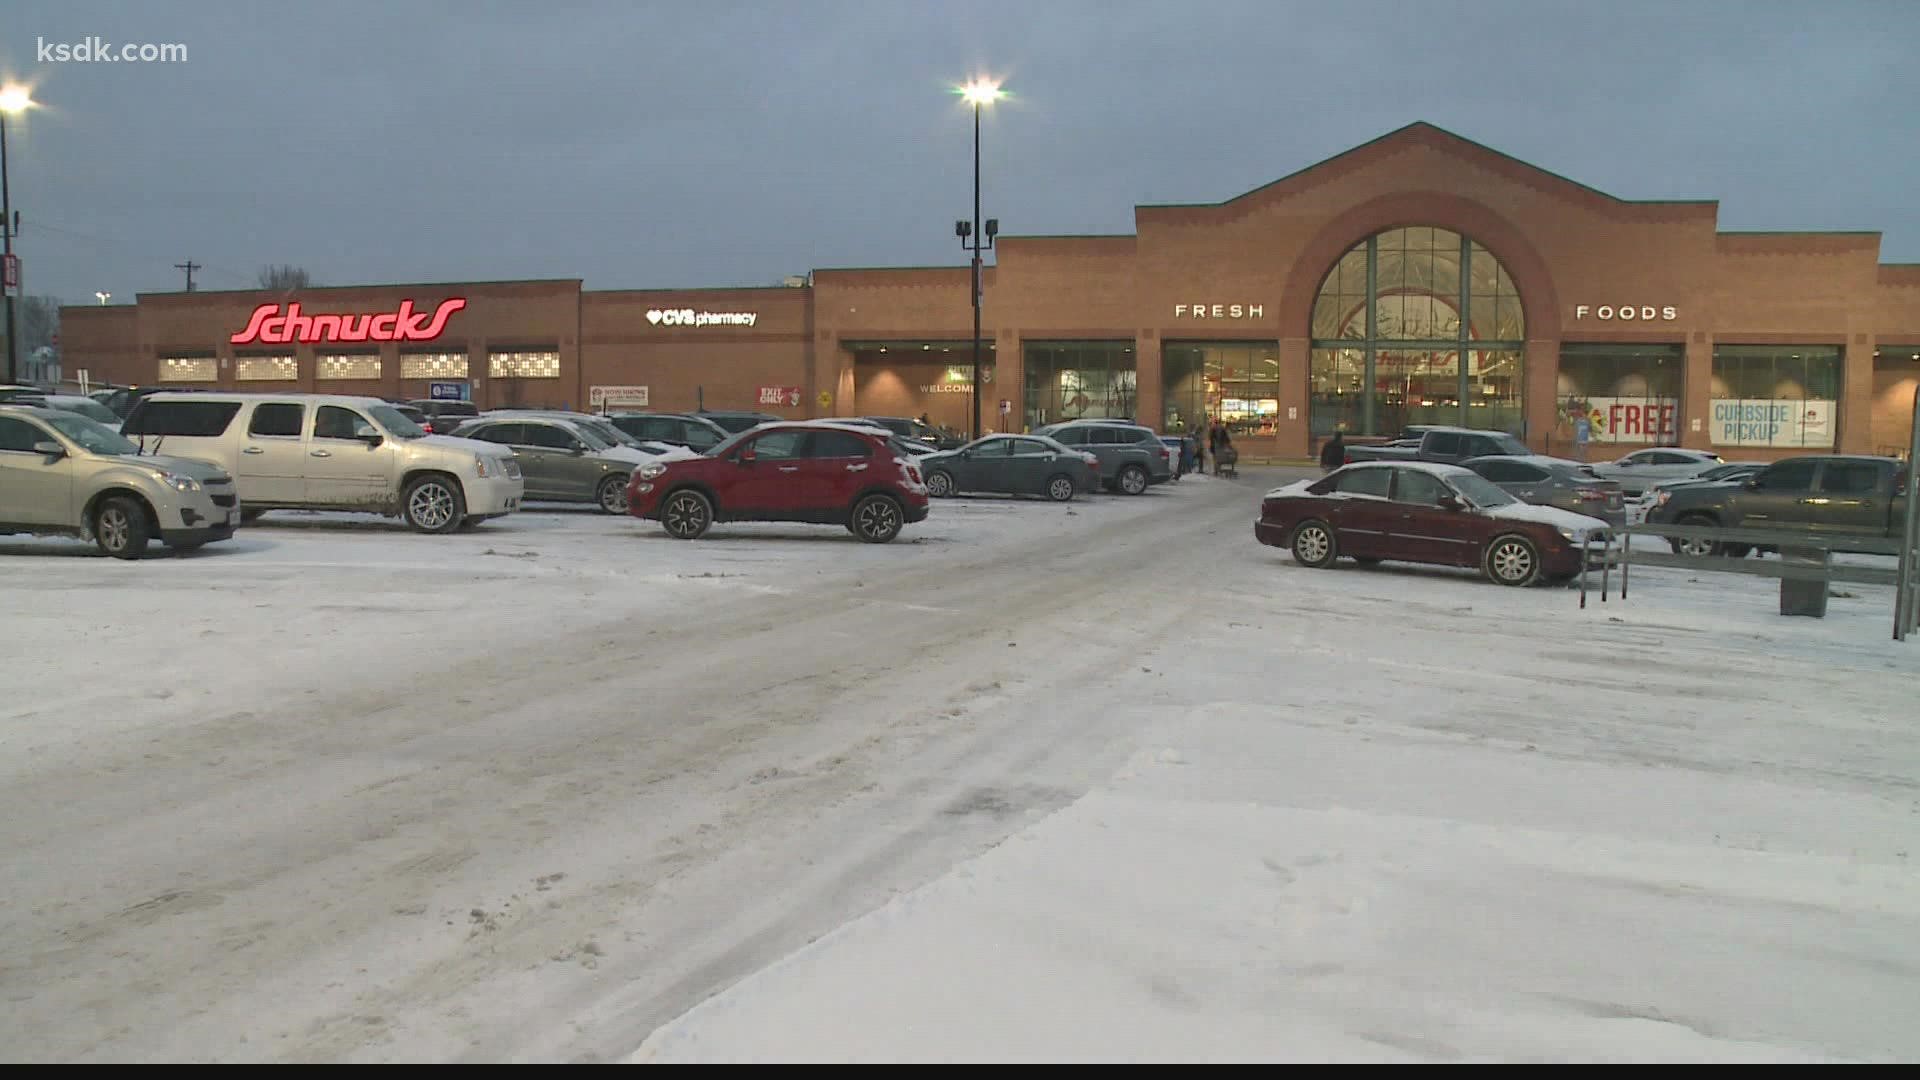 Both Schnucks and Dierbergs closed early Wednesday and plan to open late on Thursday due to the winter weather.